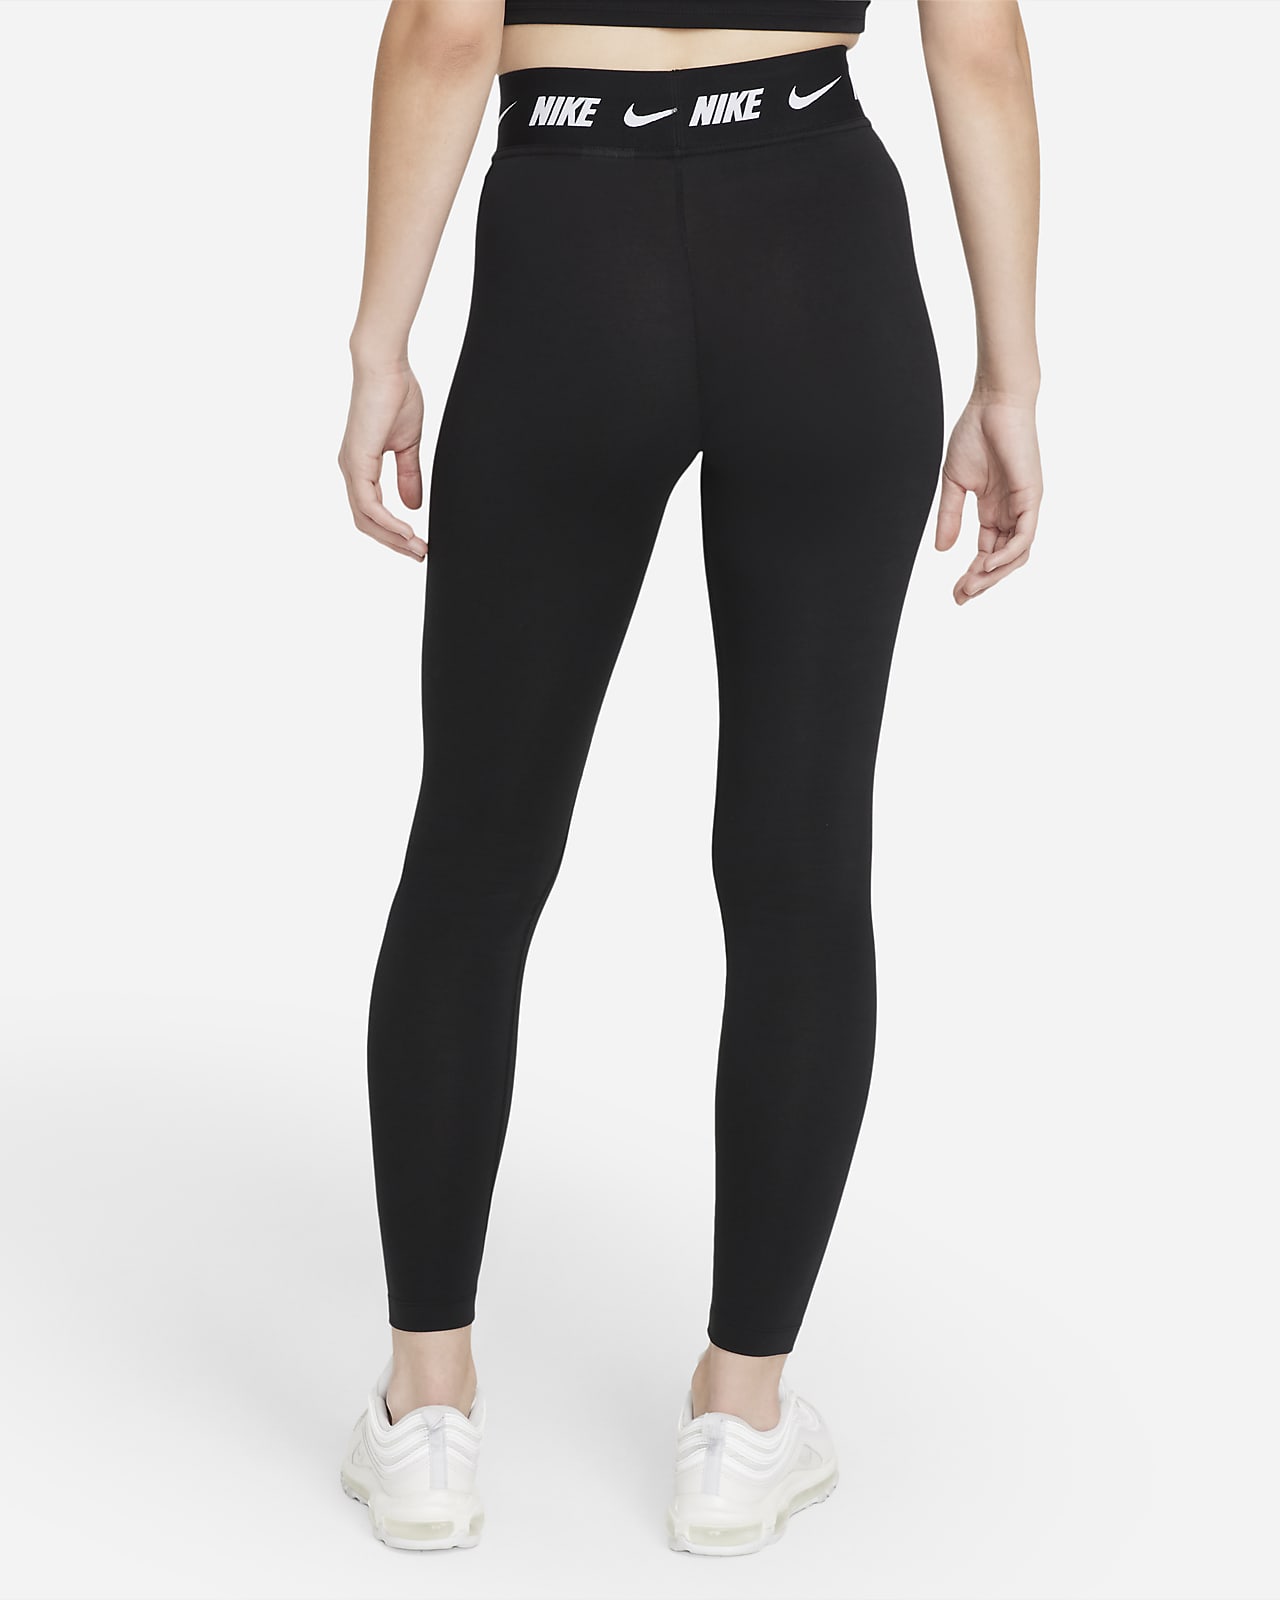 Nike Women's Fitted Synthetic Leggings